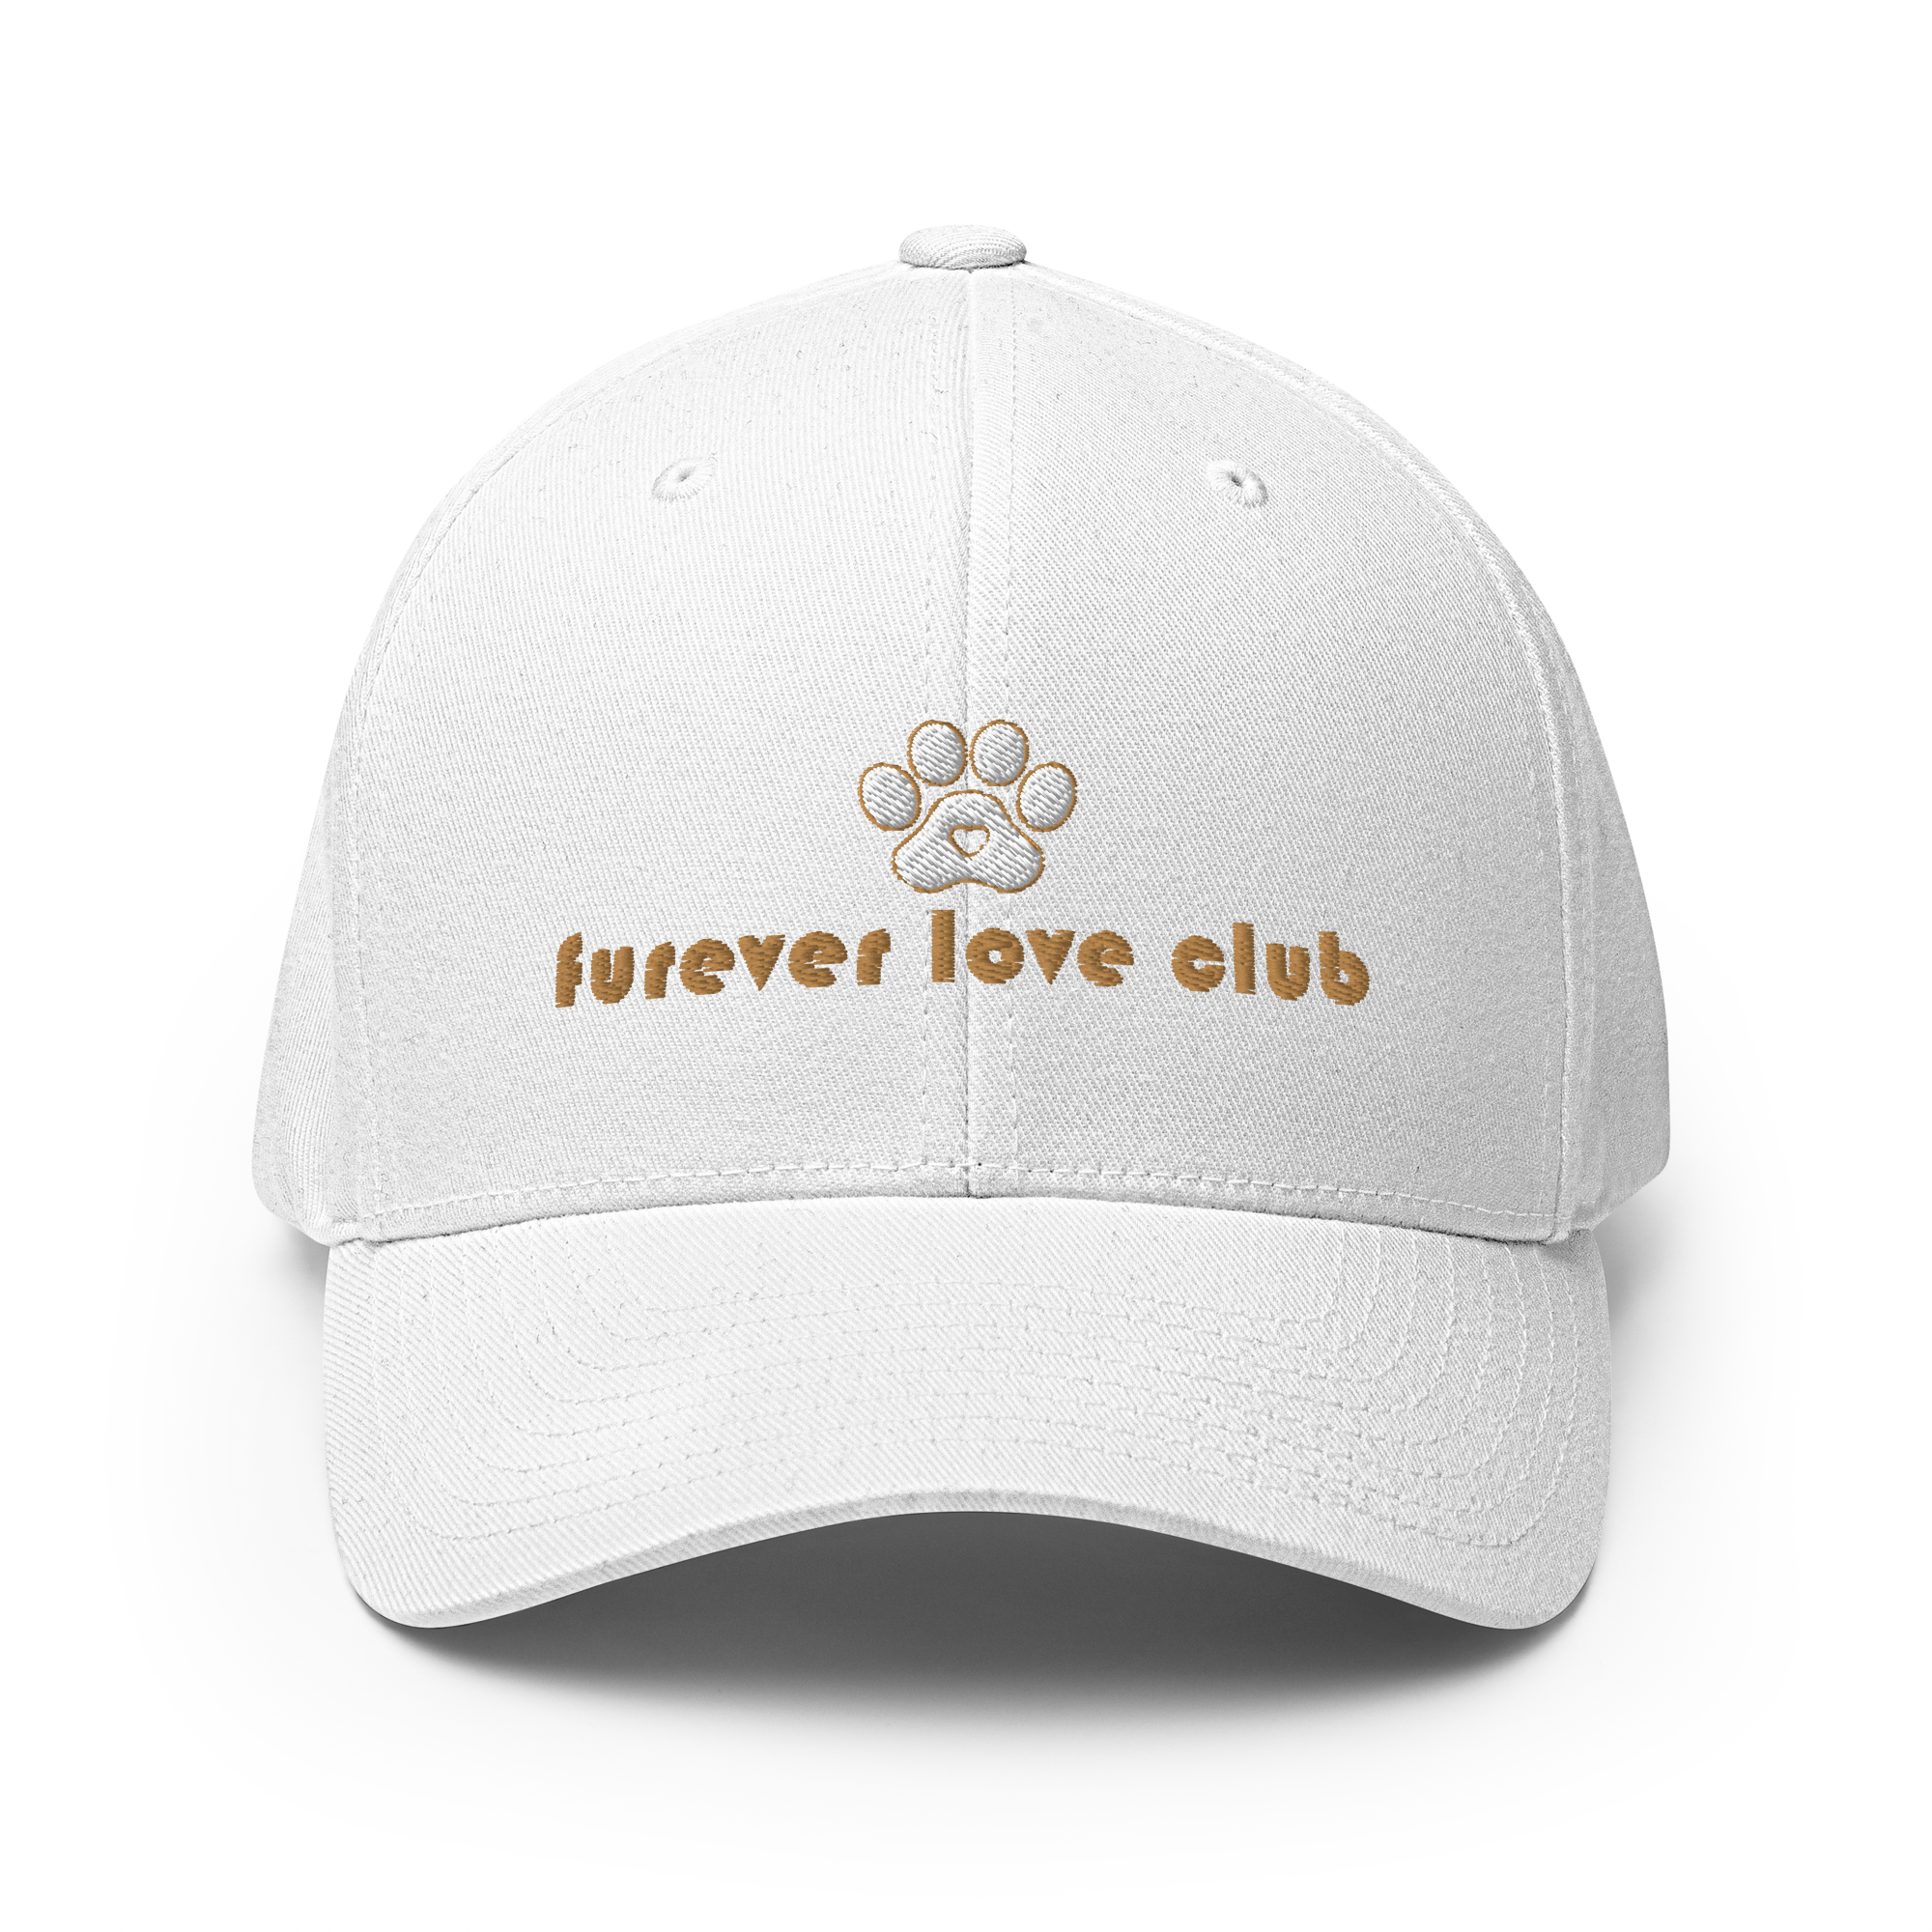 8252-closed-back-structured-cap-white-front-62391a273369a.png